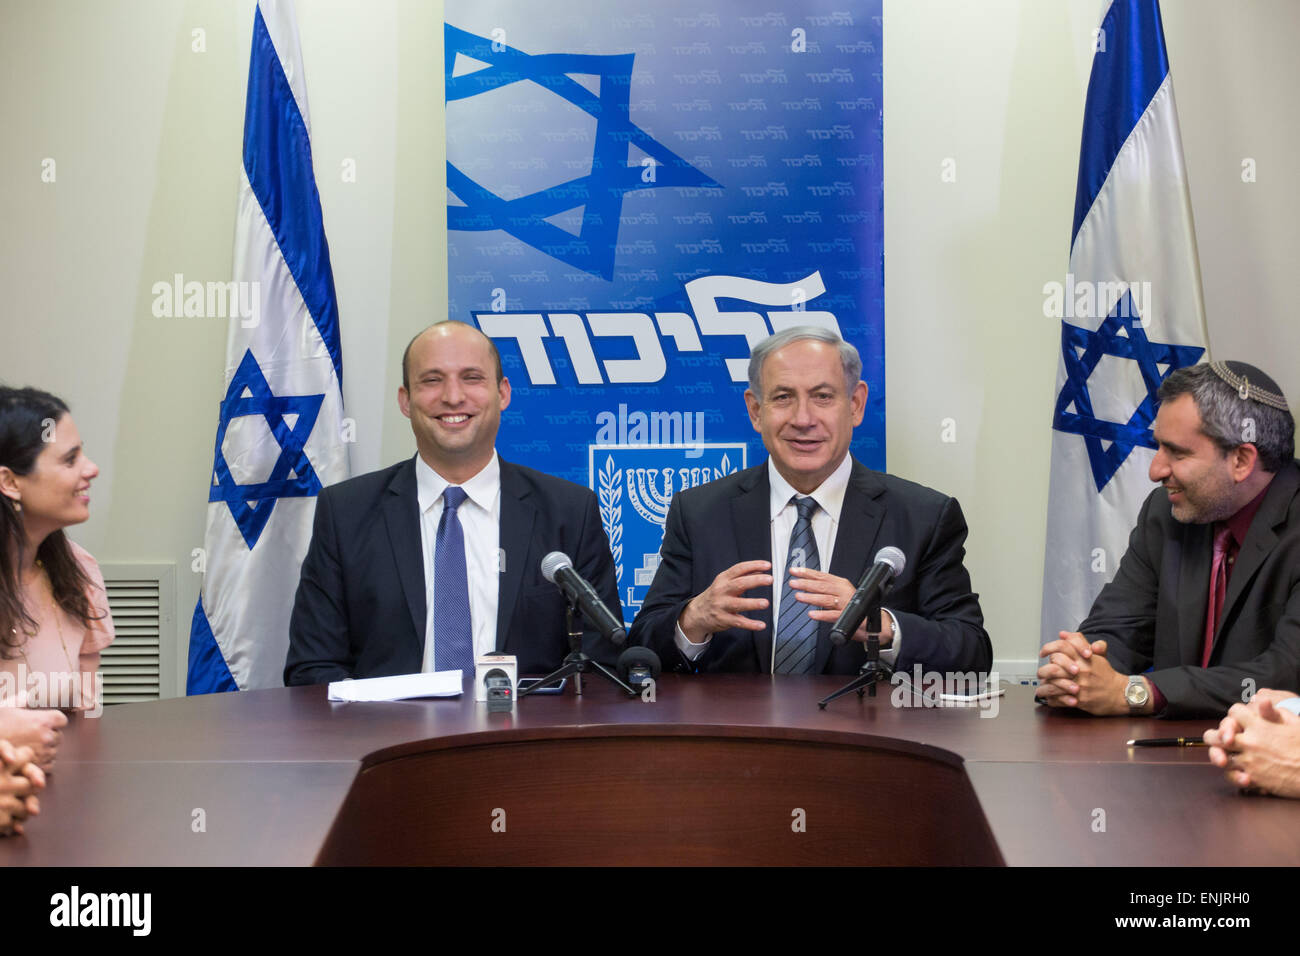 Jerusalem. 6th May, 2015. Israeli Prime Minister Benjamin Netanyahu (2nd R) and Jewish Home party leader Naftali Bennett (2nd L) hold a press conference in Jerusalem May 6, 2015. Benjamin Netanyahu managed to clinch a deal with the nationalist Jewish Home party late Wednesday night, securing a new ruling coalition with a tiny majority in the 120-member parliament. © JINI/Xinhua/Alamy Live News Stock Photo